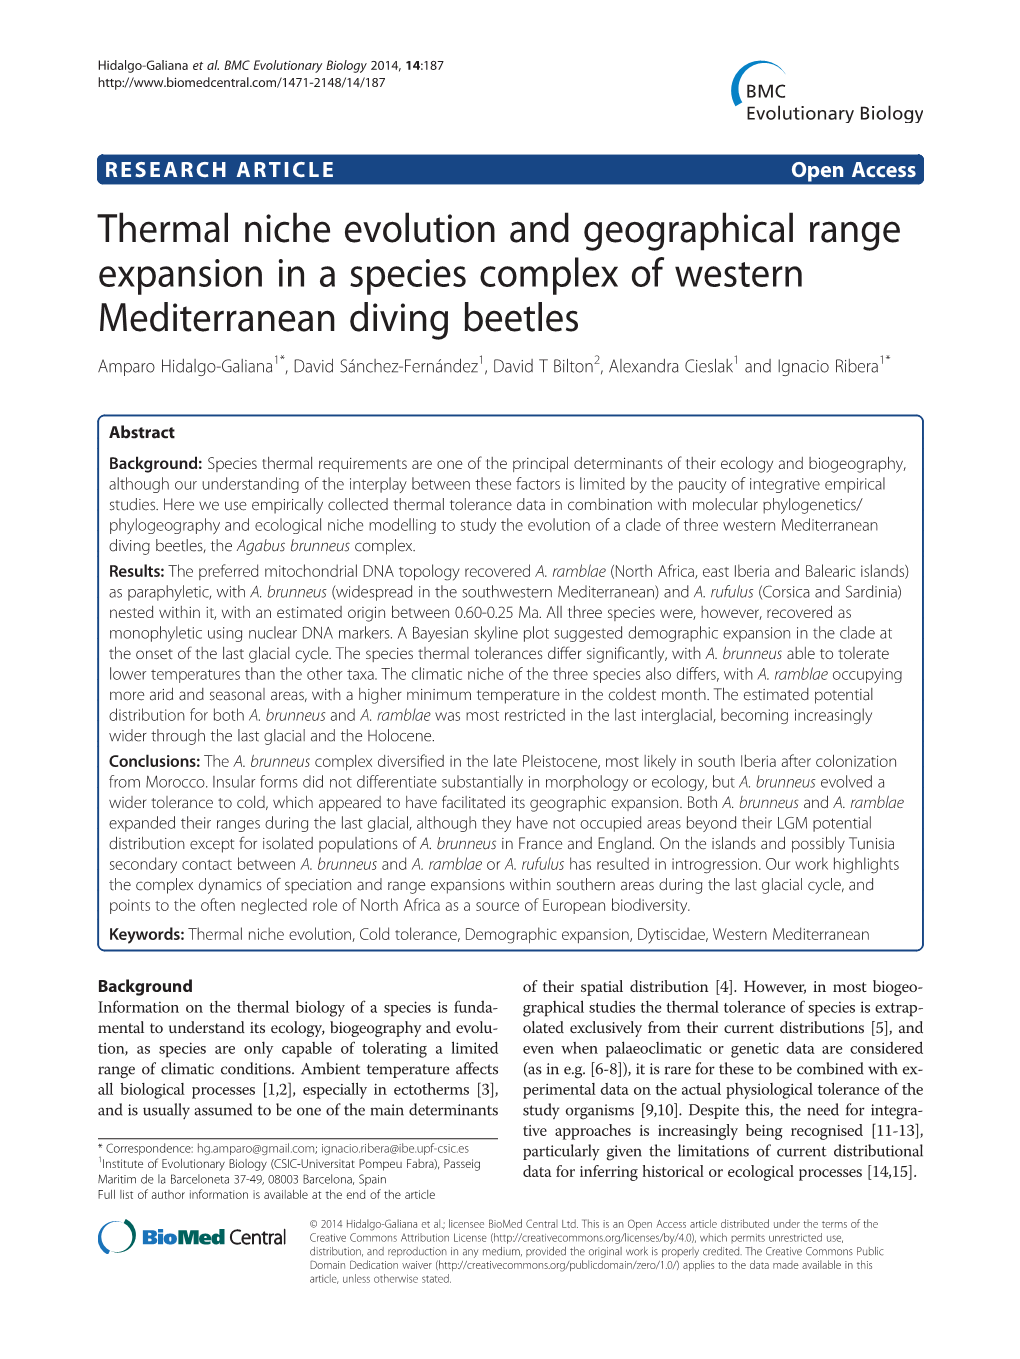 Thermal Niche Evolution and Geographical Range Expansion in A